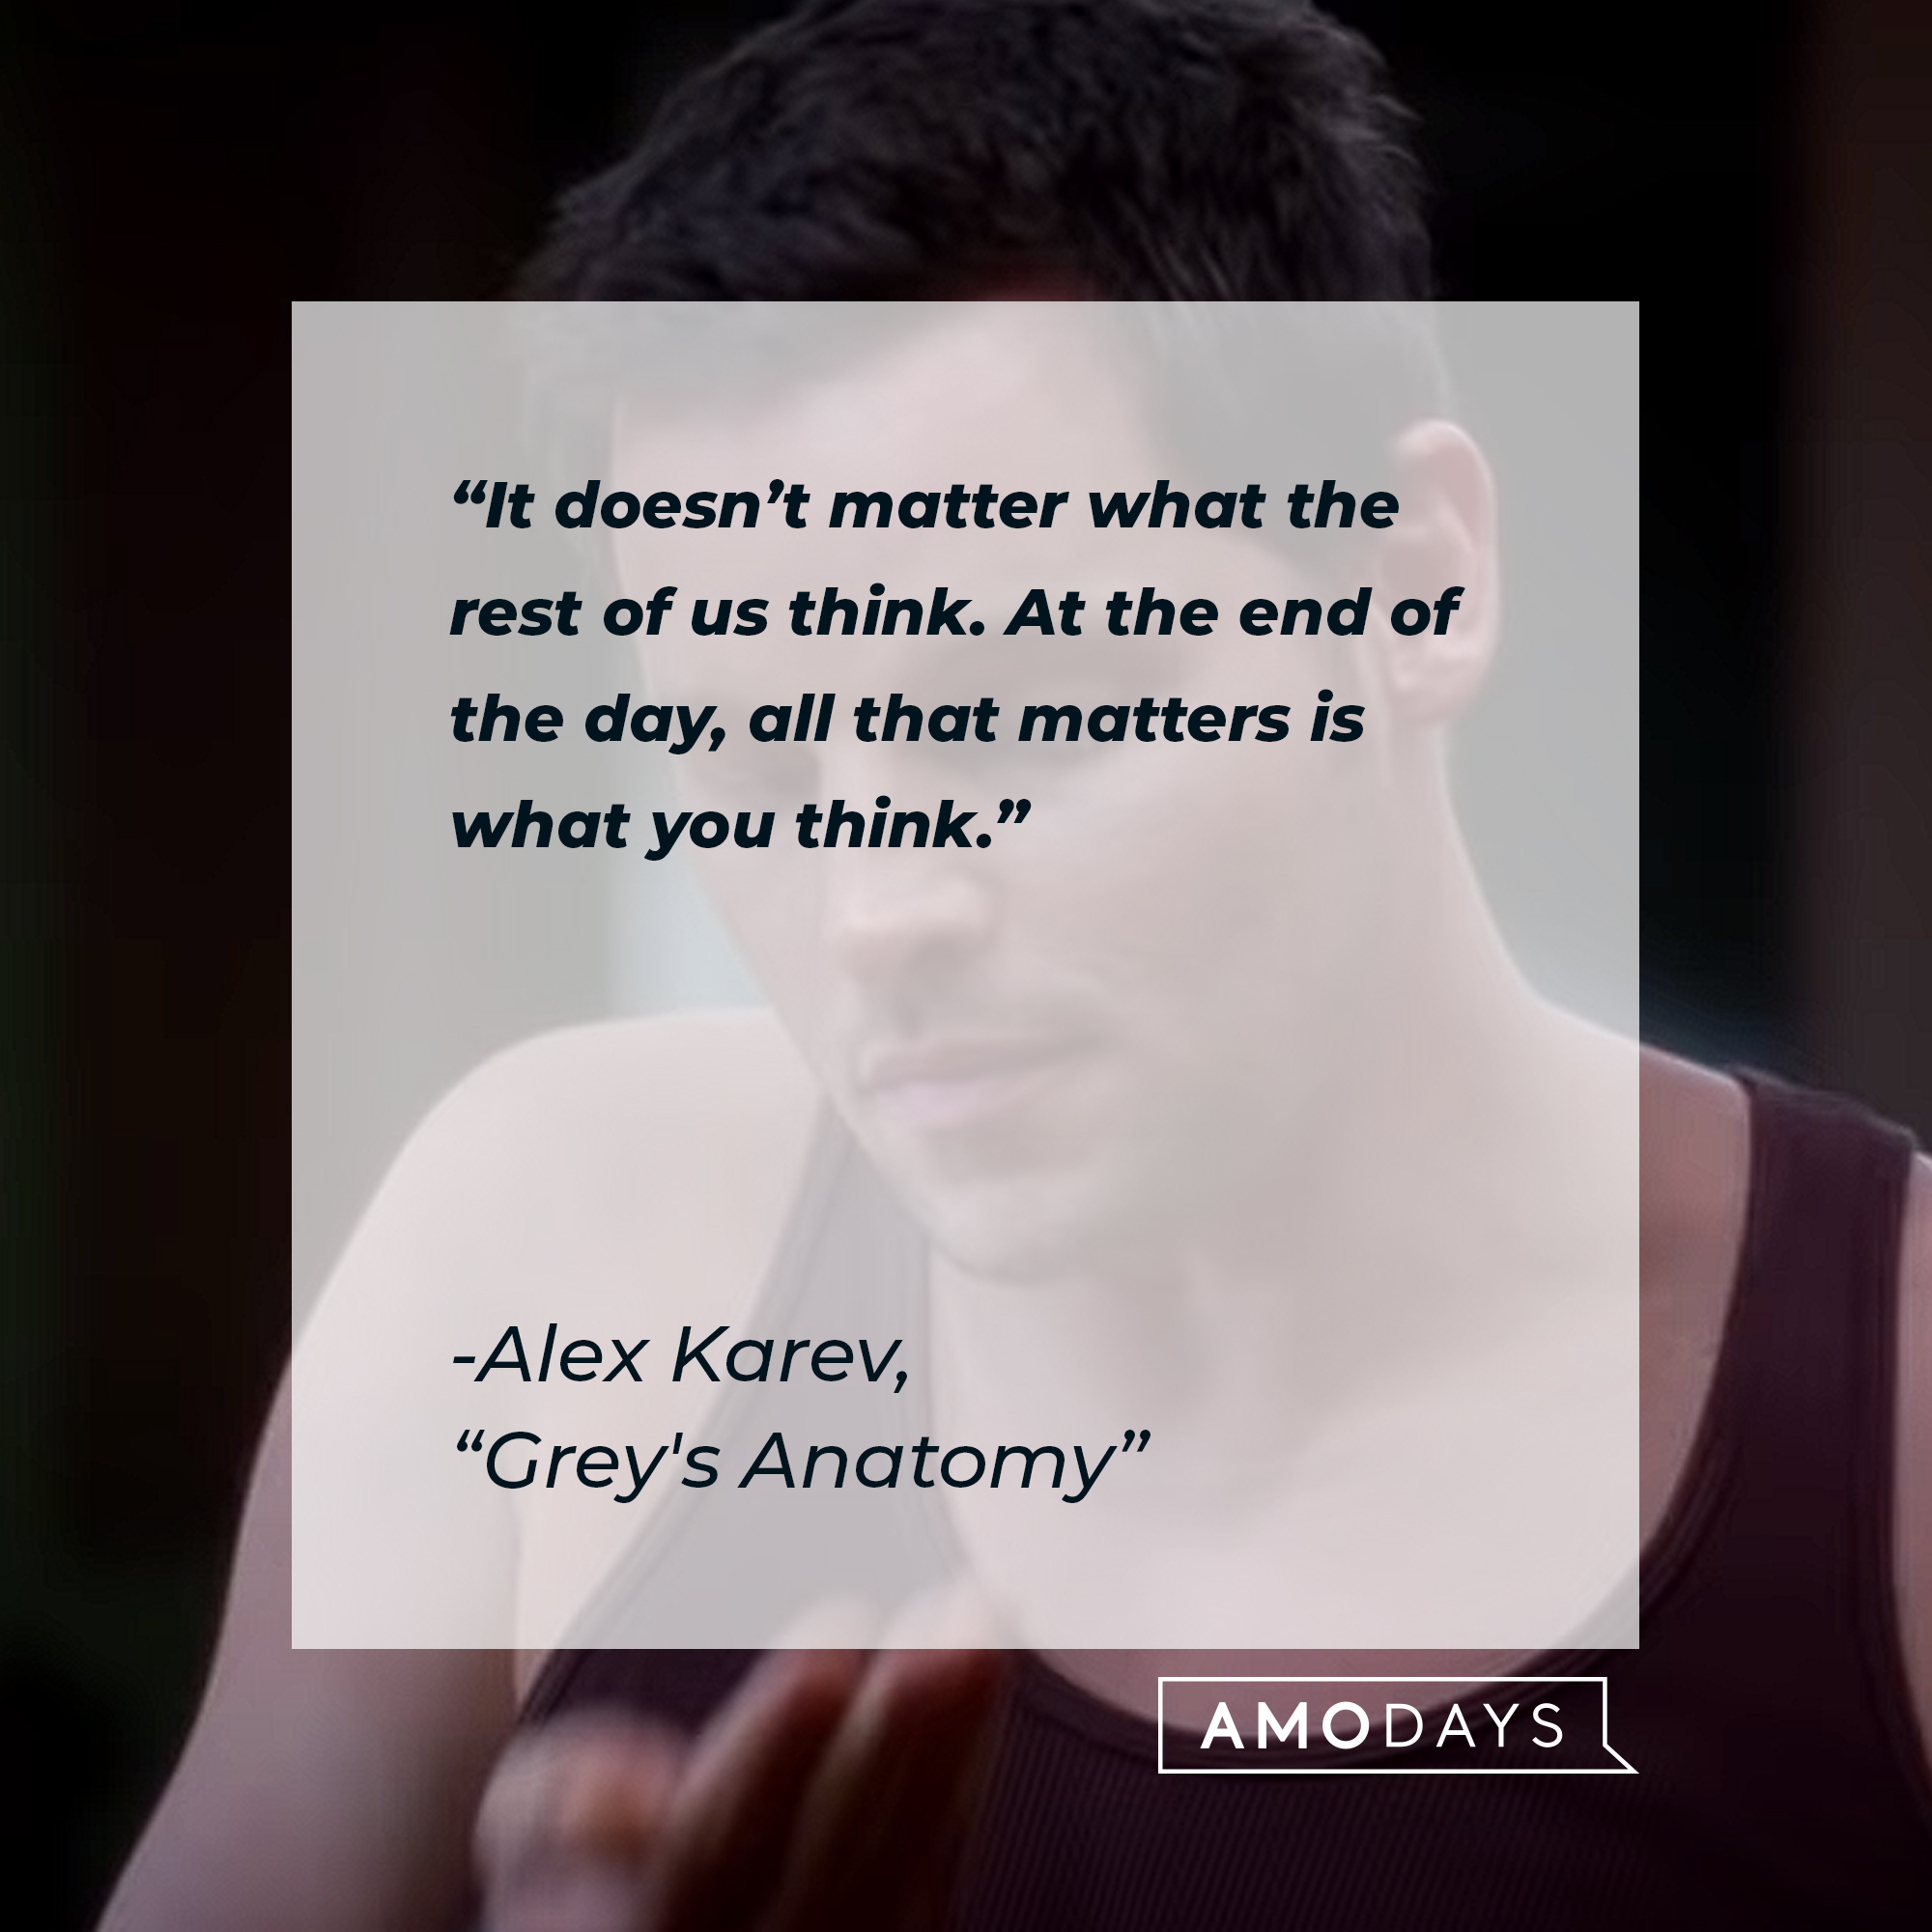 Alex Karev’s quote from “Grey’s Anatomy”: “It doesn’t matter what the rest of us think. At the end of the day, all that matters is what you think.” | Source: youtube.com/ABCNetwork